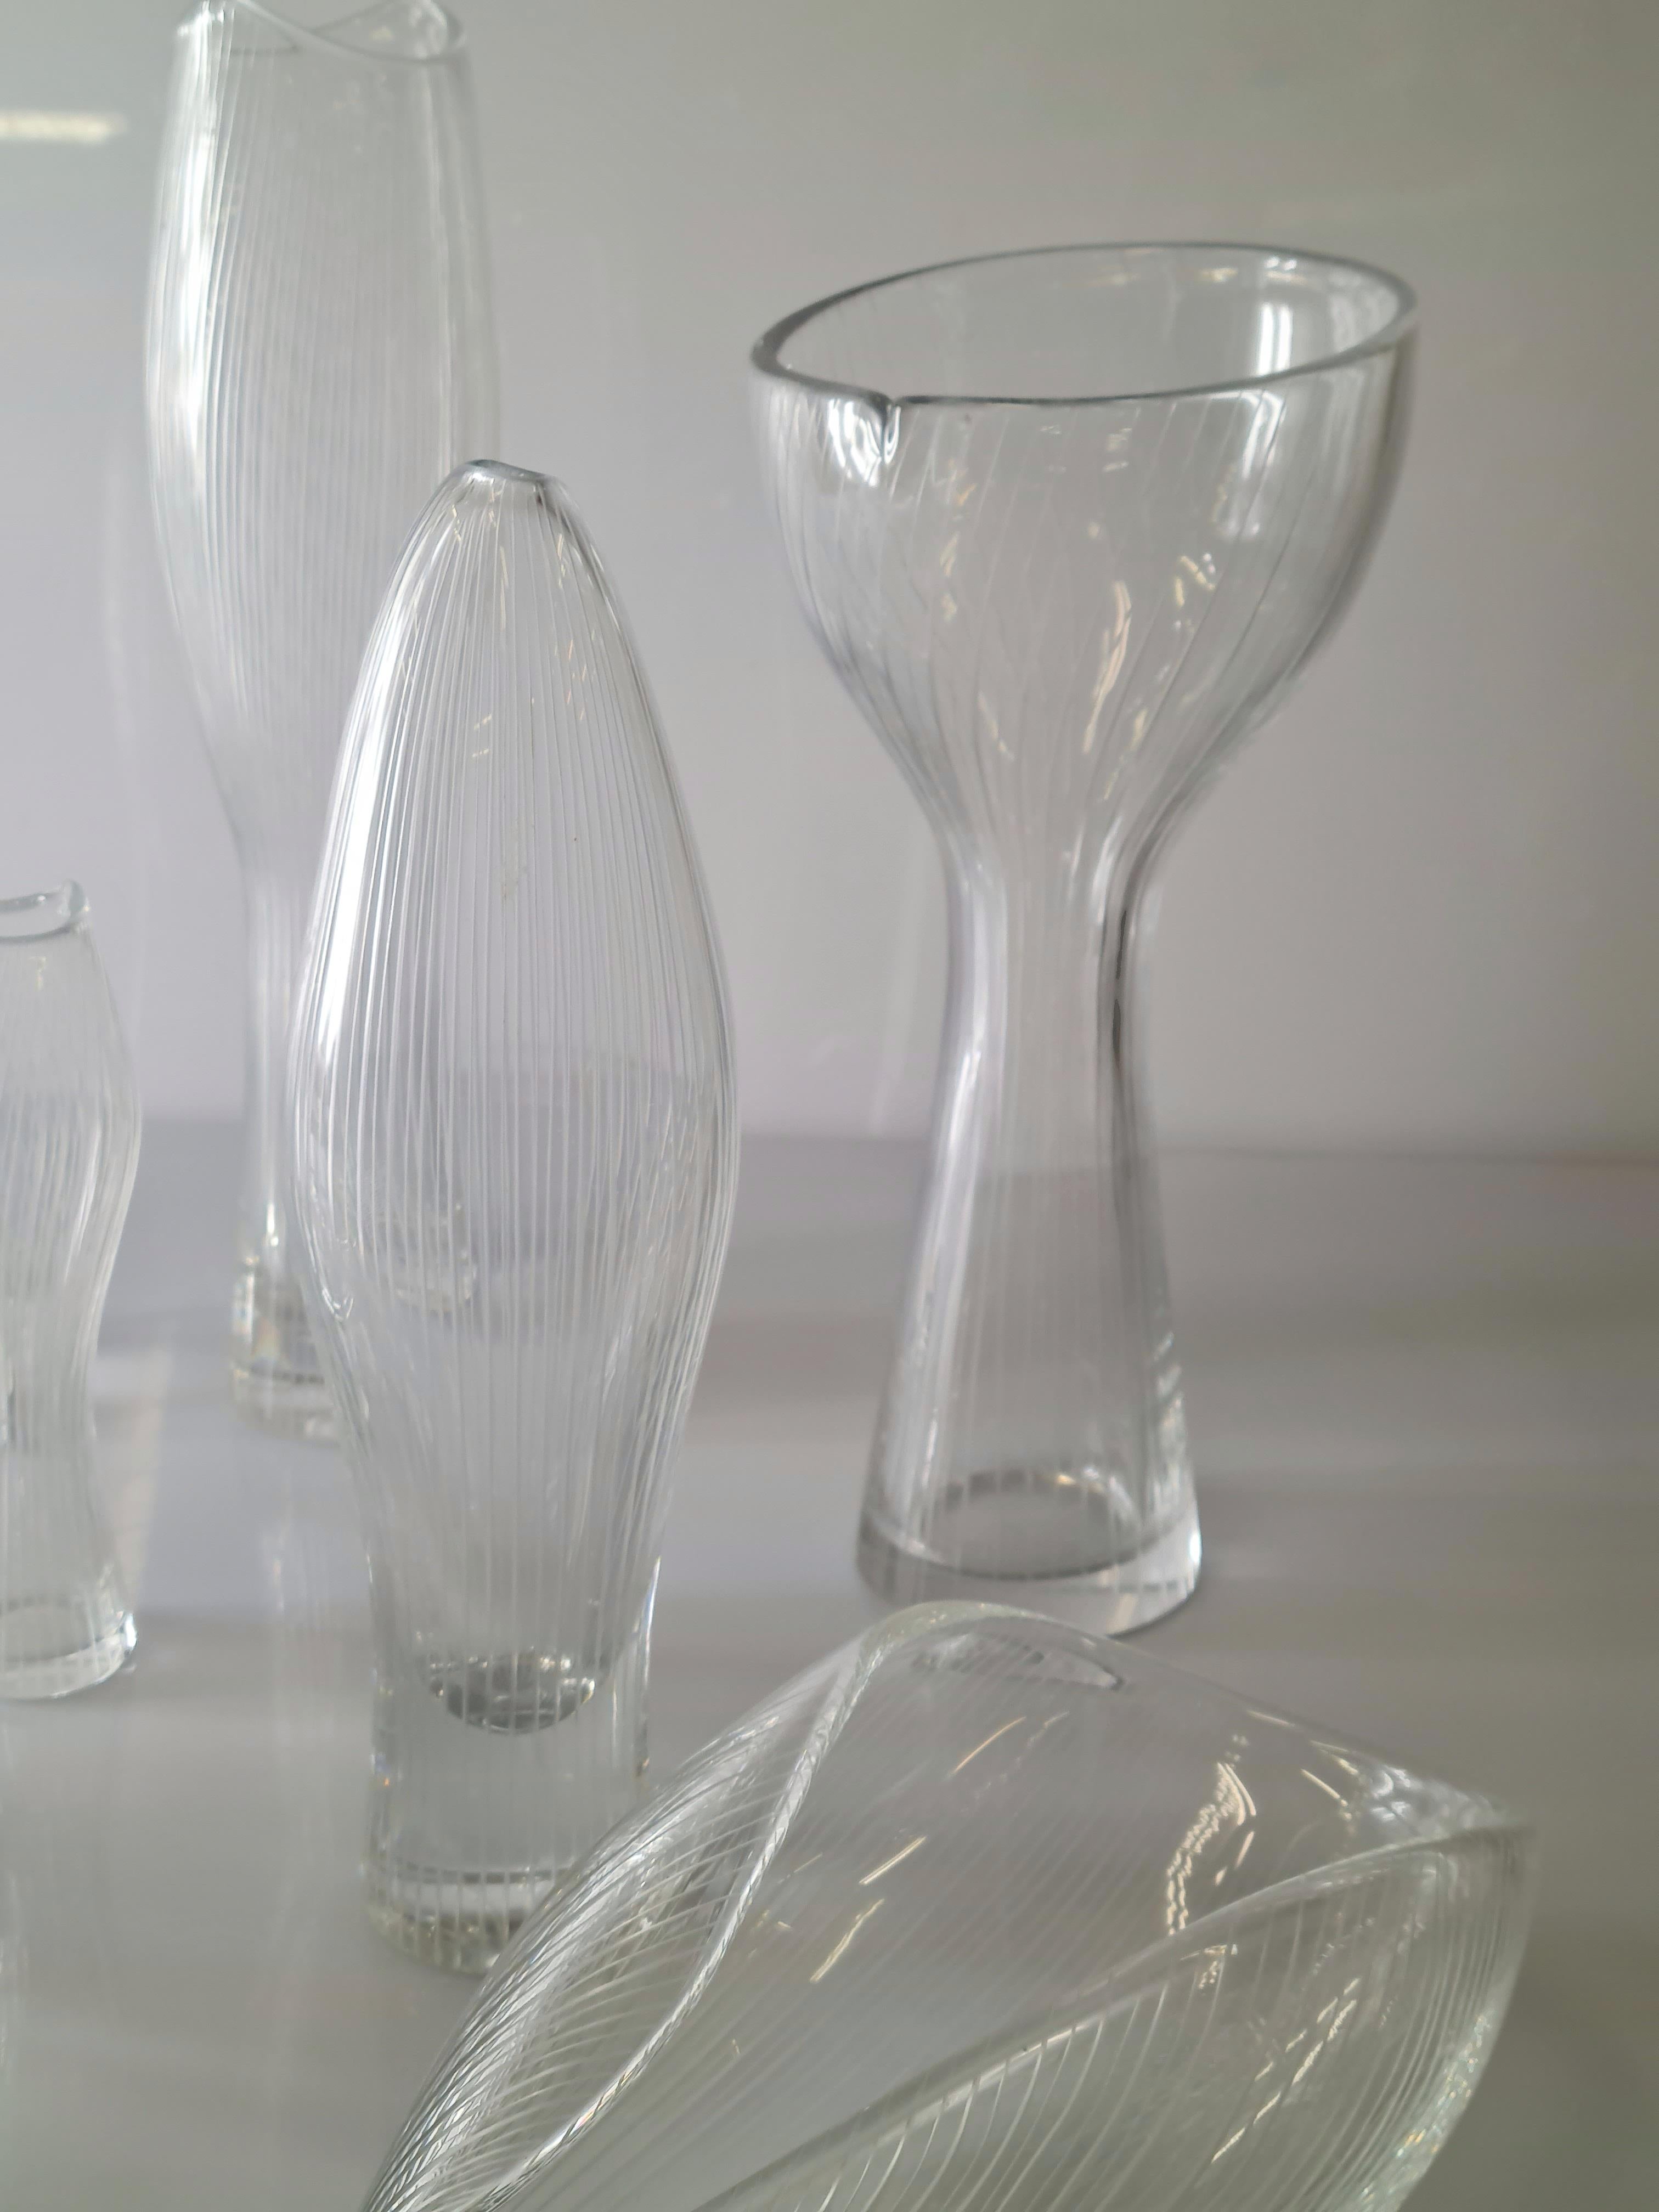 Mid-20th Century A Variety of Art Glass Objects by Tapio Wirkkala for Iittala, 1950s For Sale